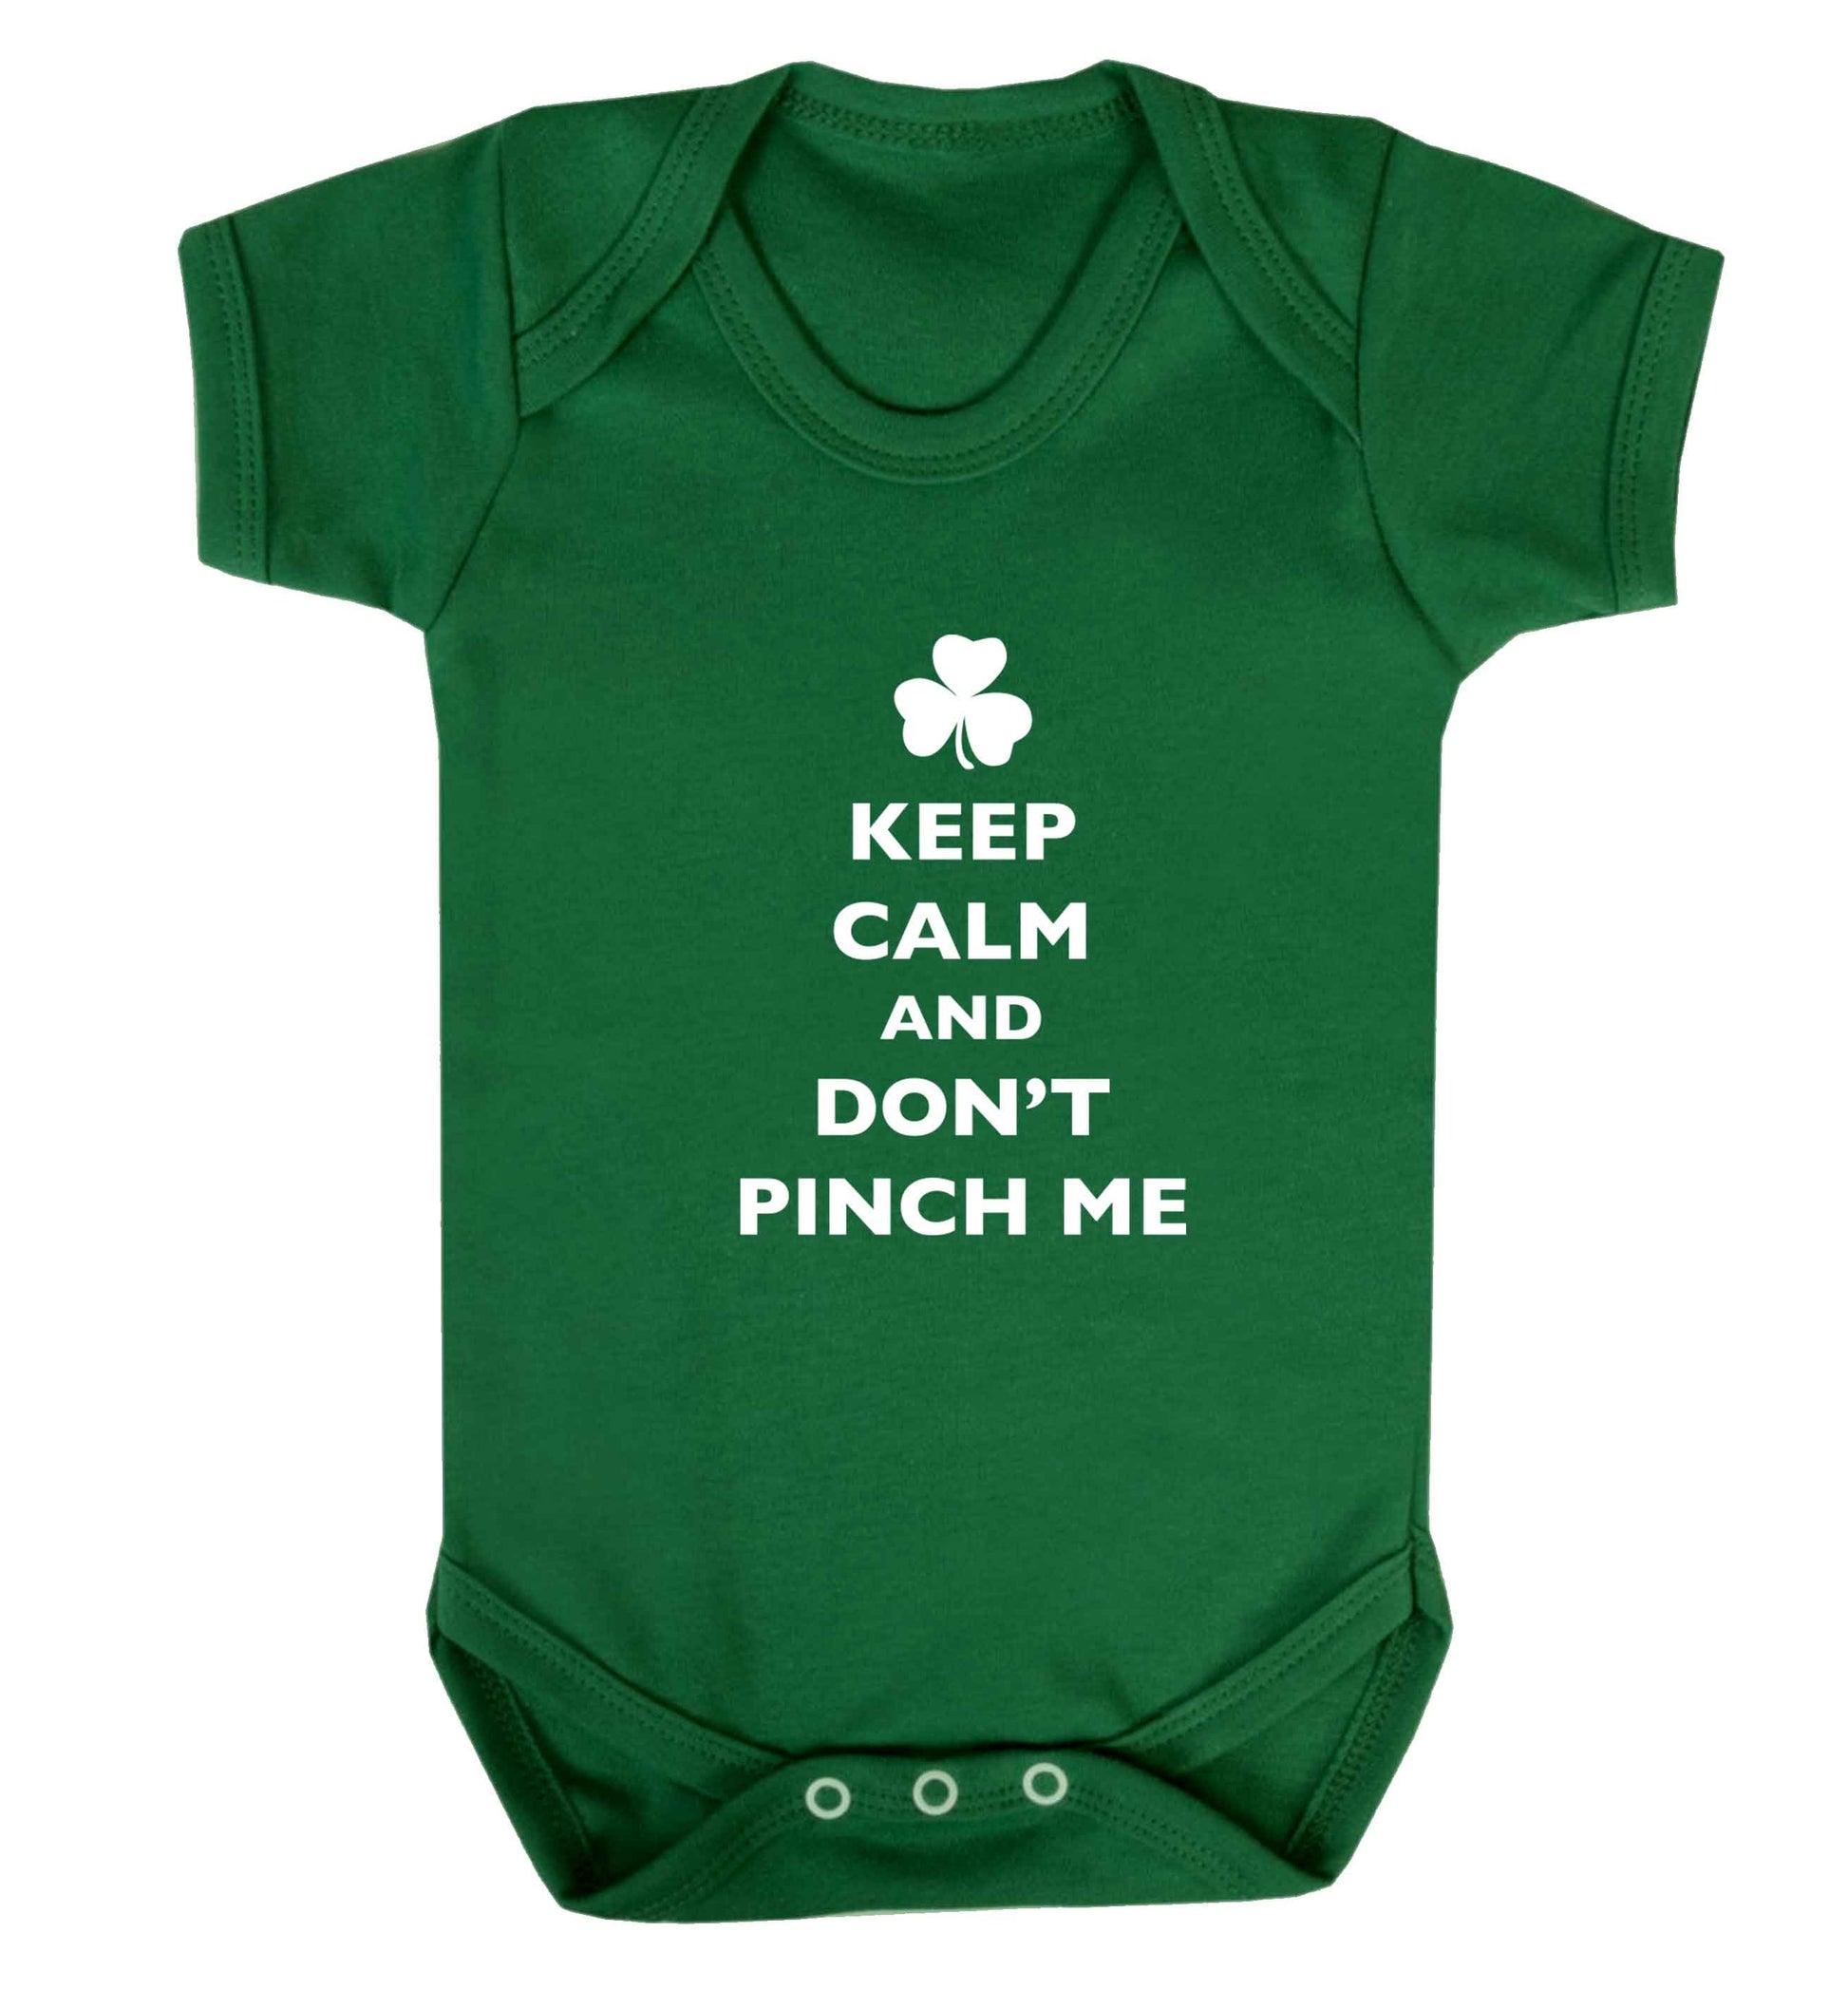 Keep calm and don't pinch me baby vest green 18-24 months